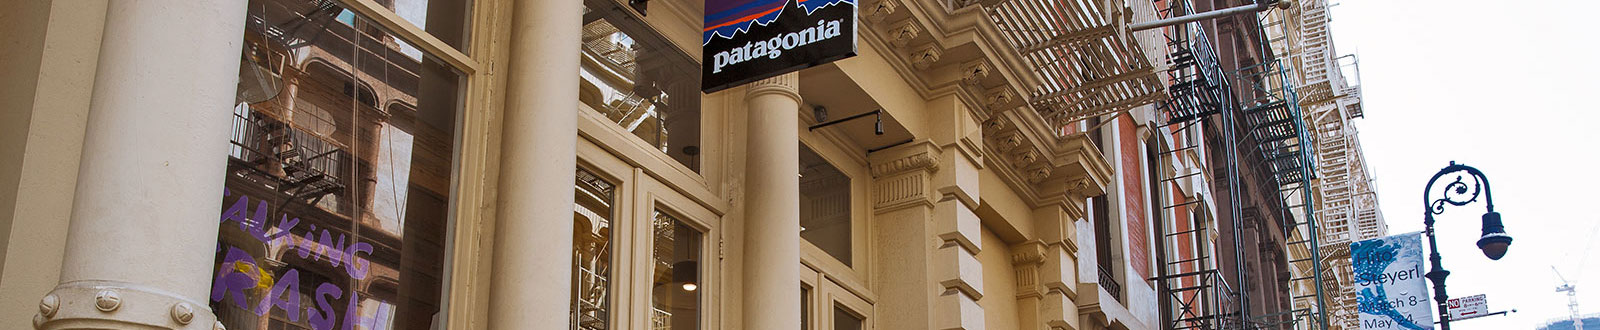 Patagonia Supported - Patagonia Action Works